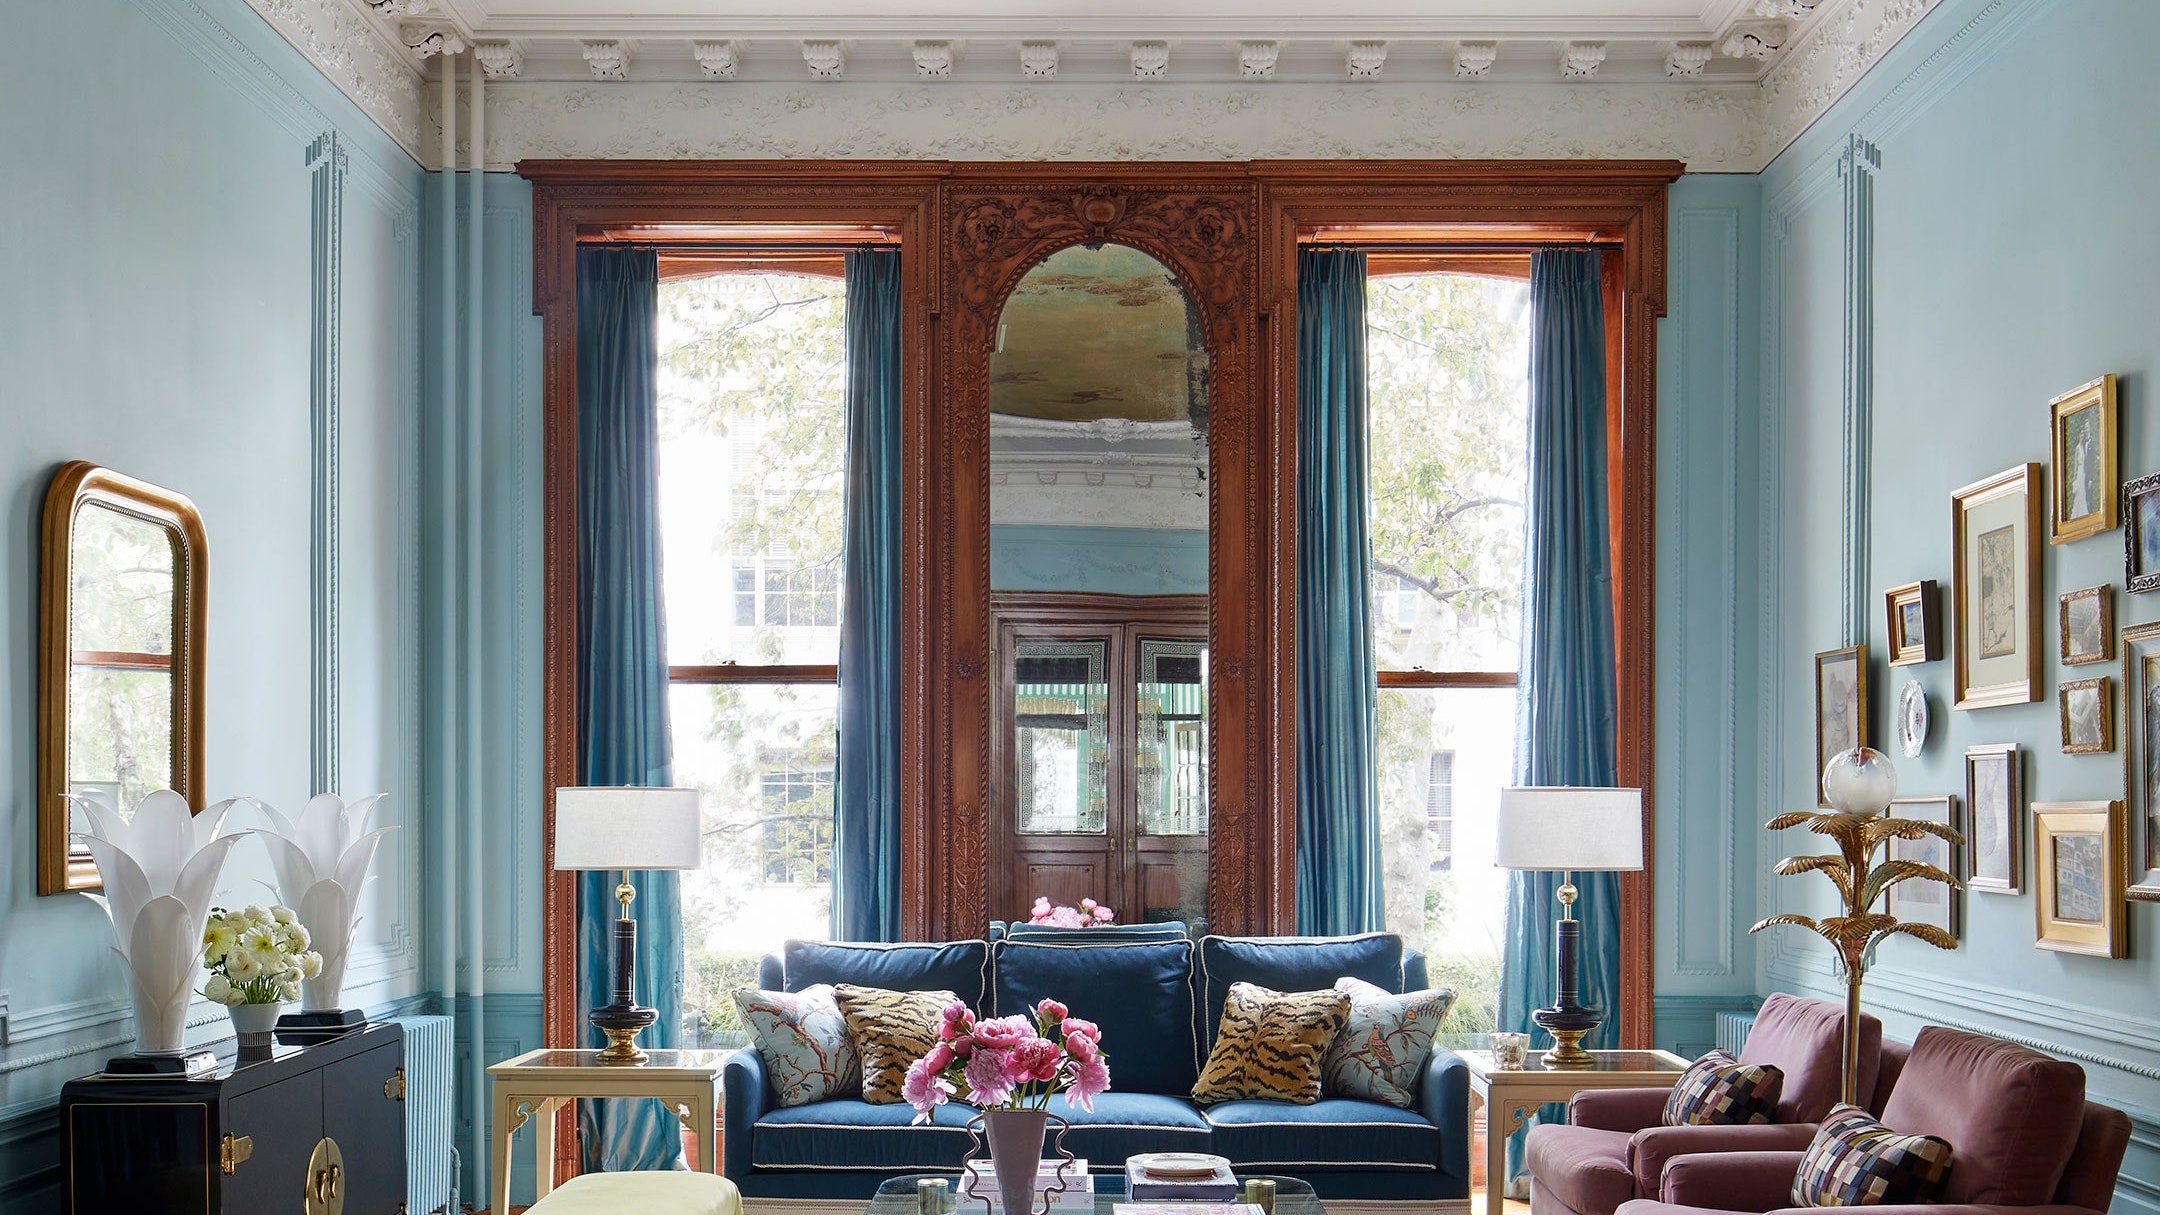 Brownstone parlor with intricate ceiling molding and antique frescoe